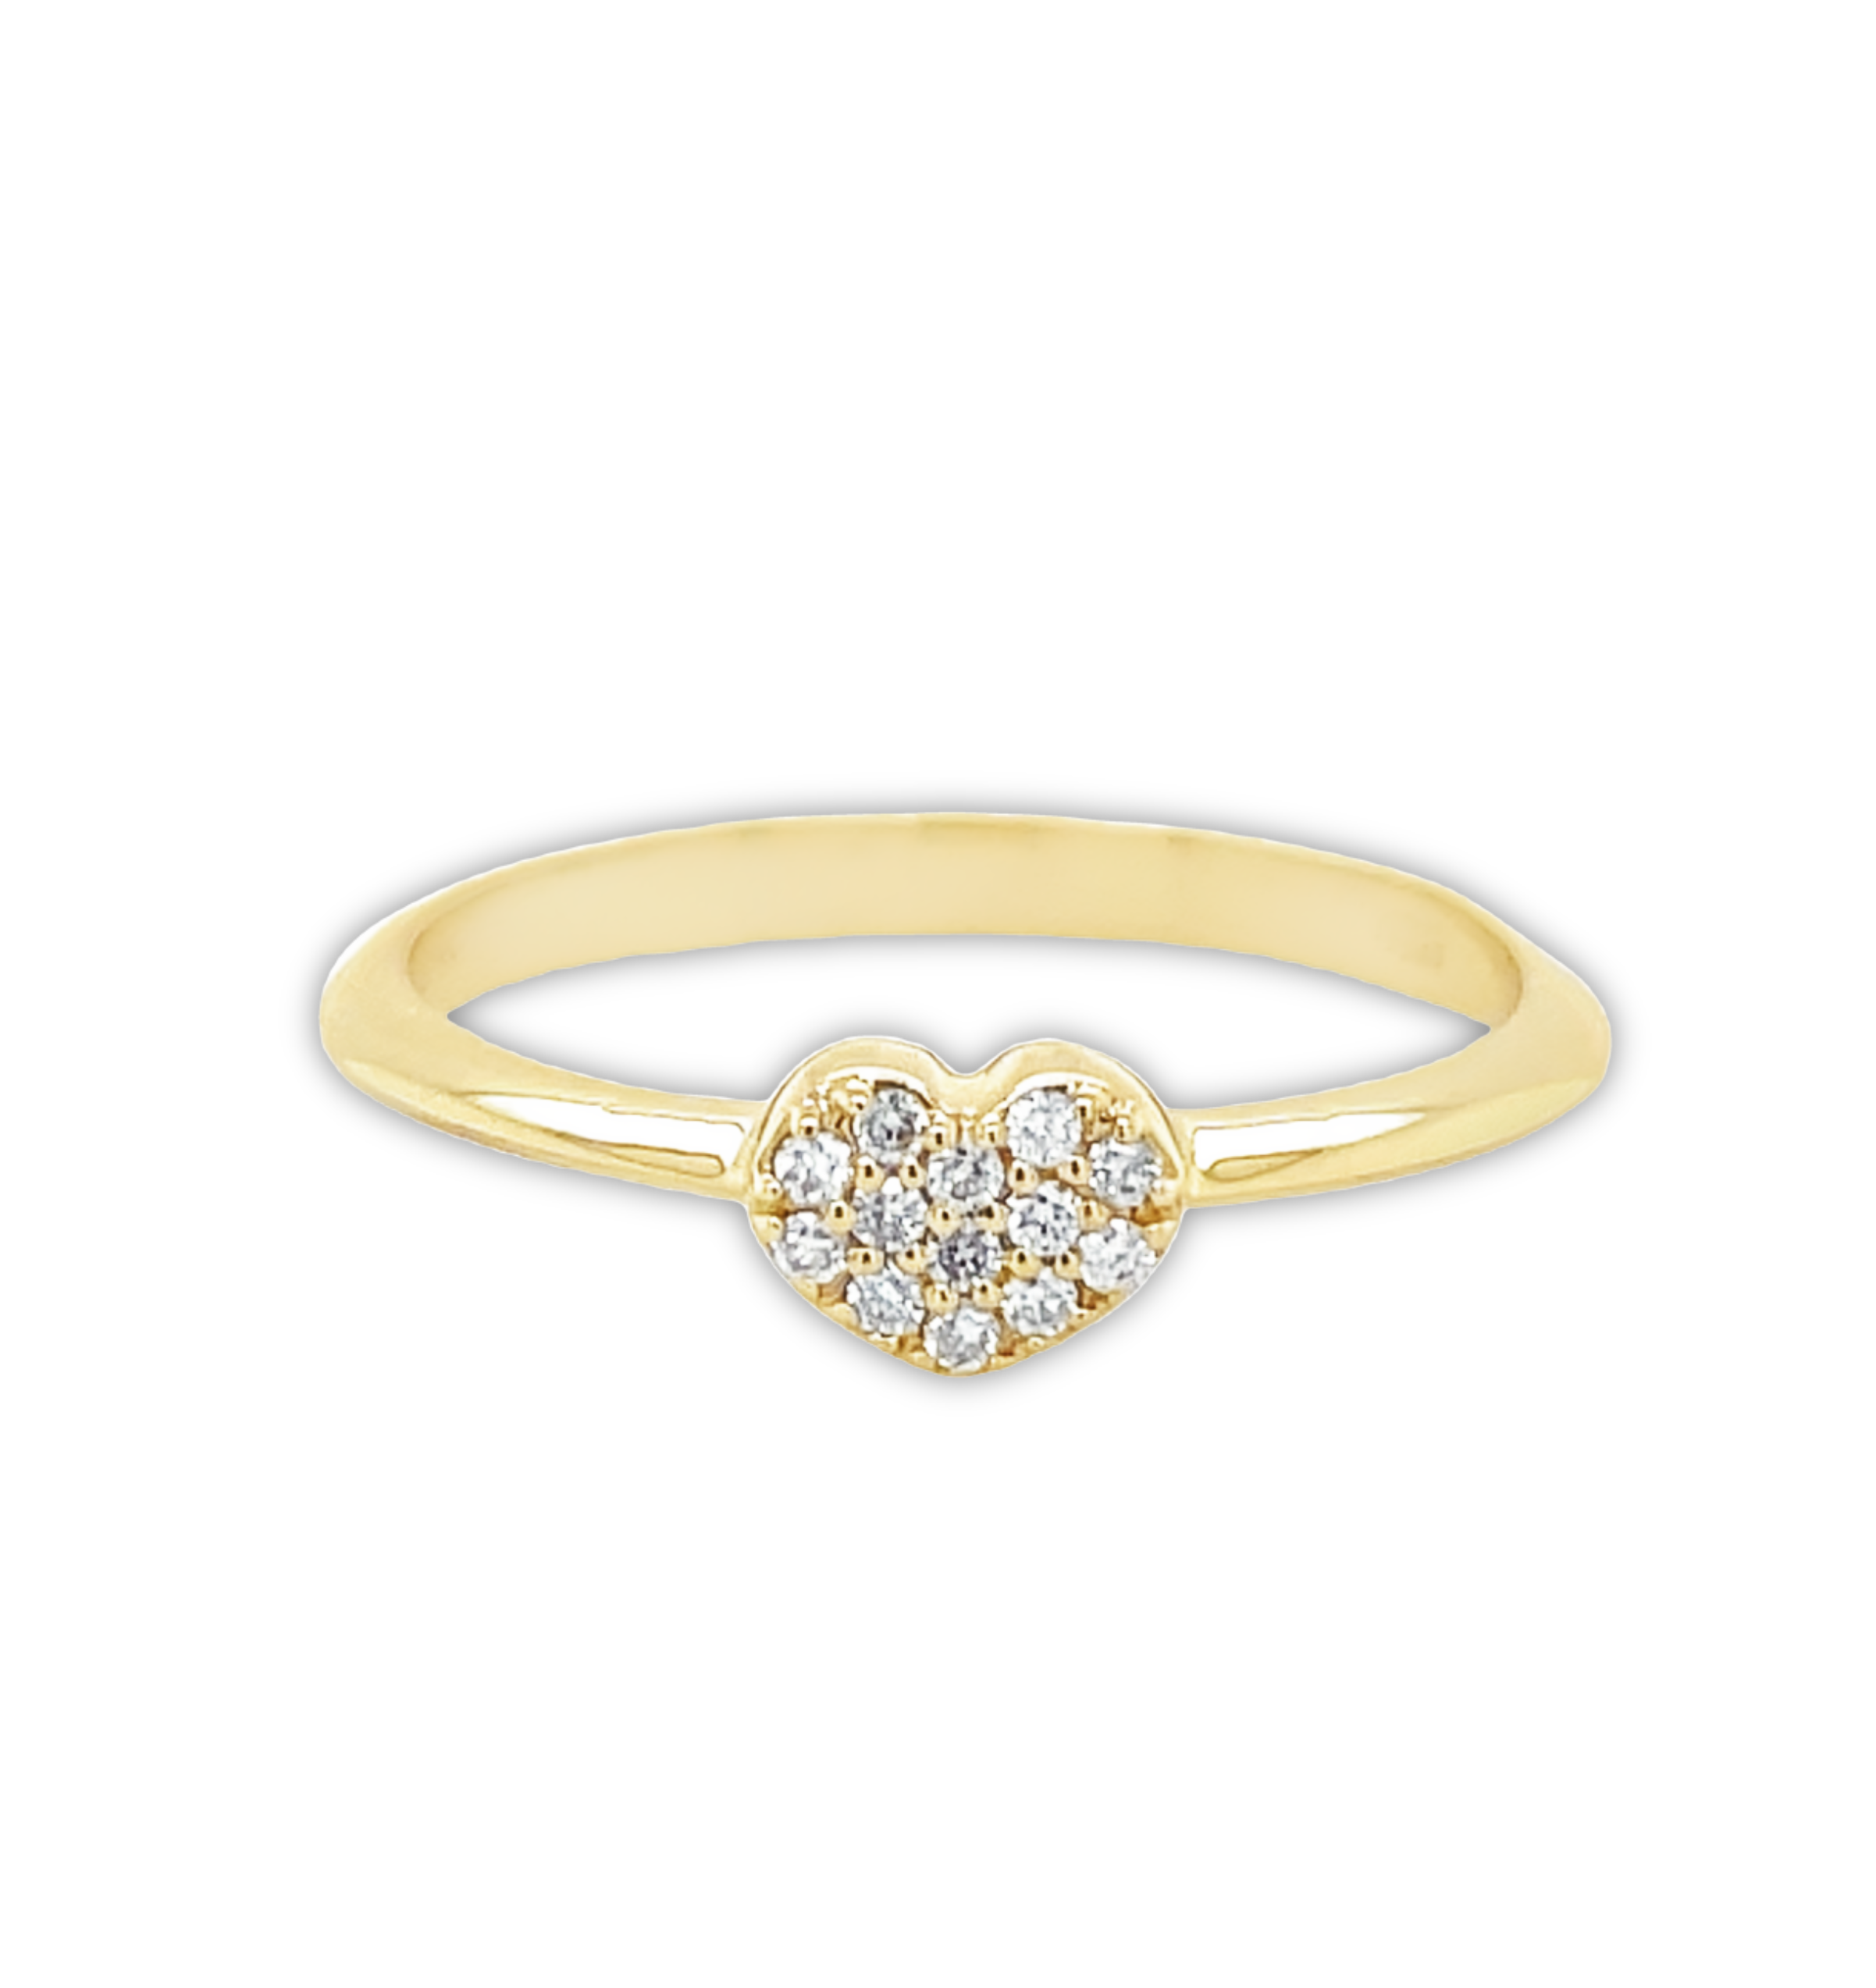 Lustrous 14k yellow gold sets off dazzling .06 cts round diamonds, artfully arranged in a romantic heart shape. Charming and stylish. Size 6.5 (resizeable).